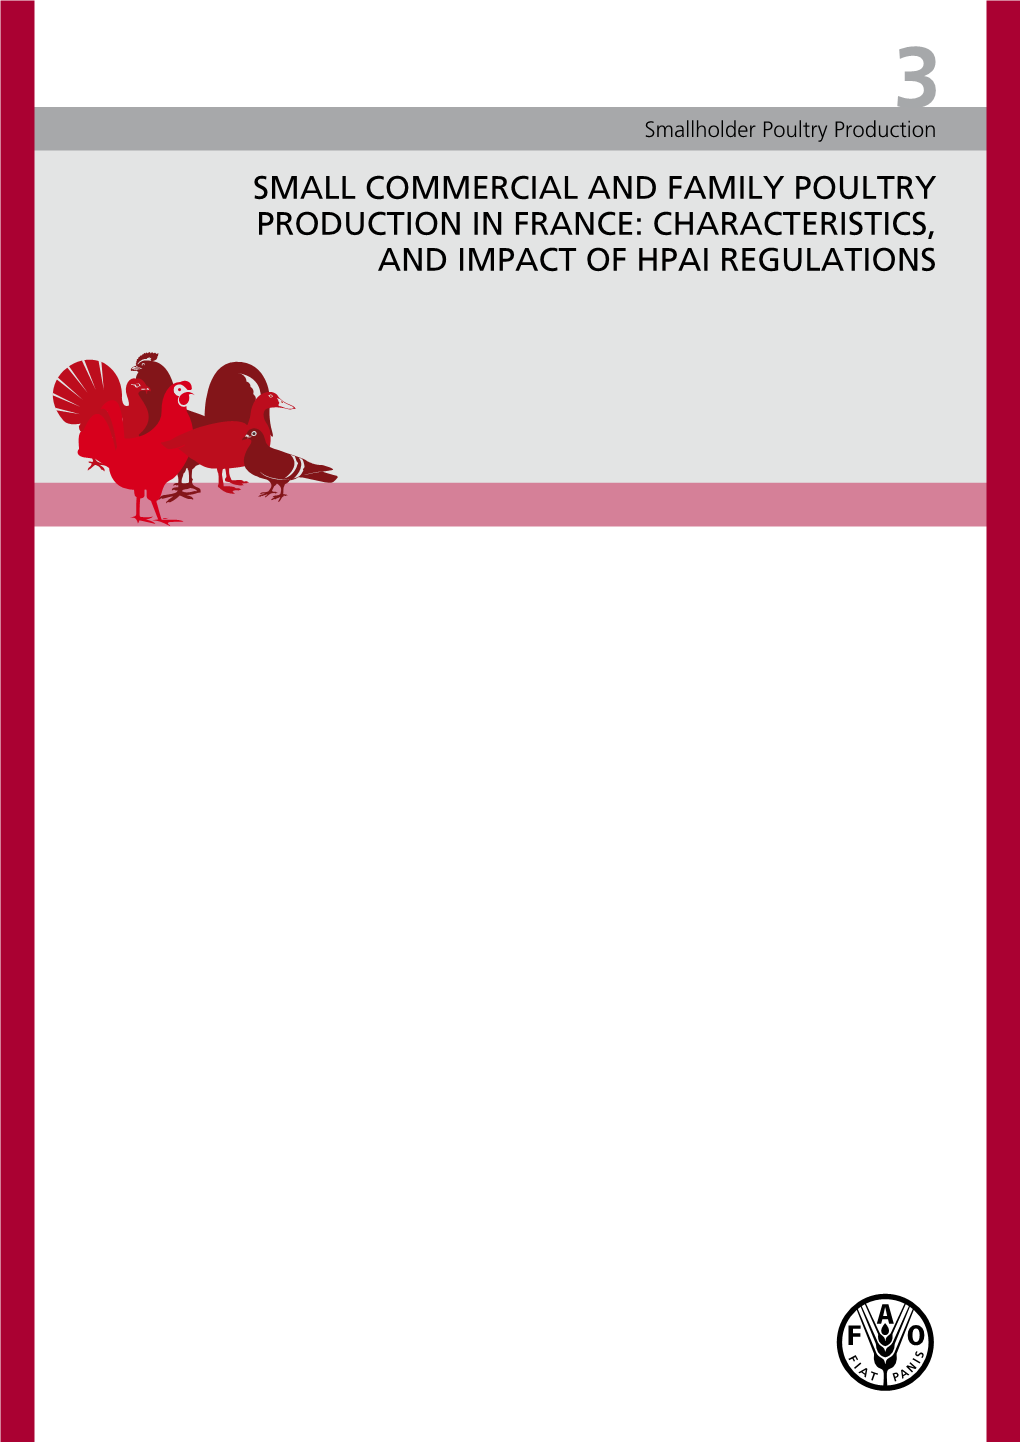 Small Commercial and Family Poultry Production in France: Characteristics, and Impact of Hpai Regulations